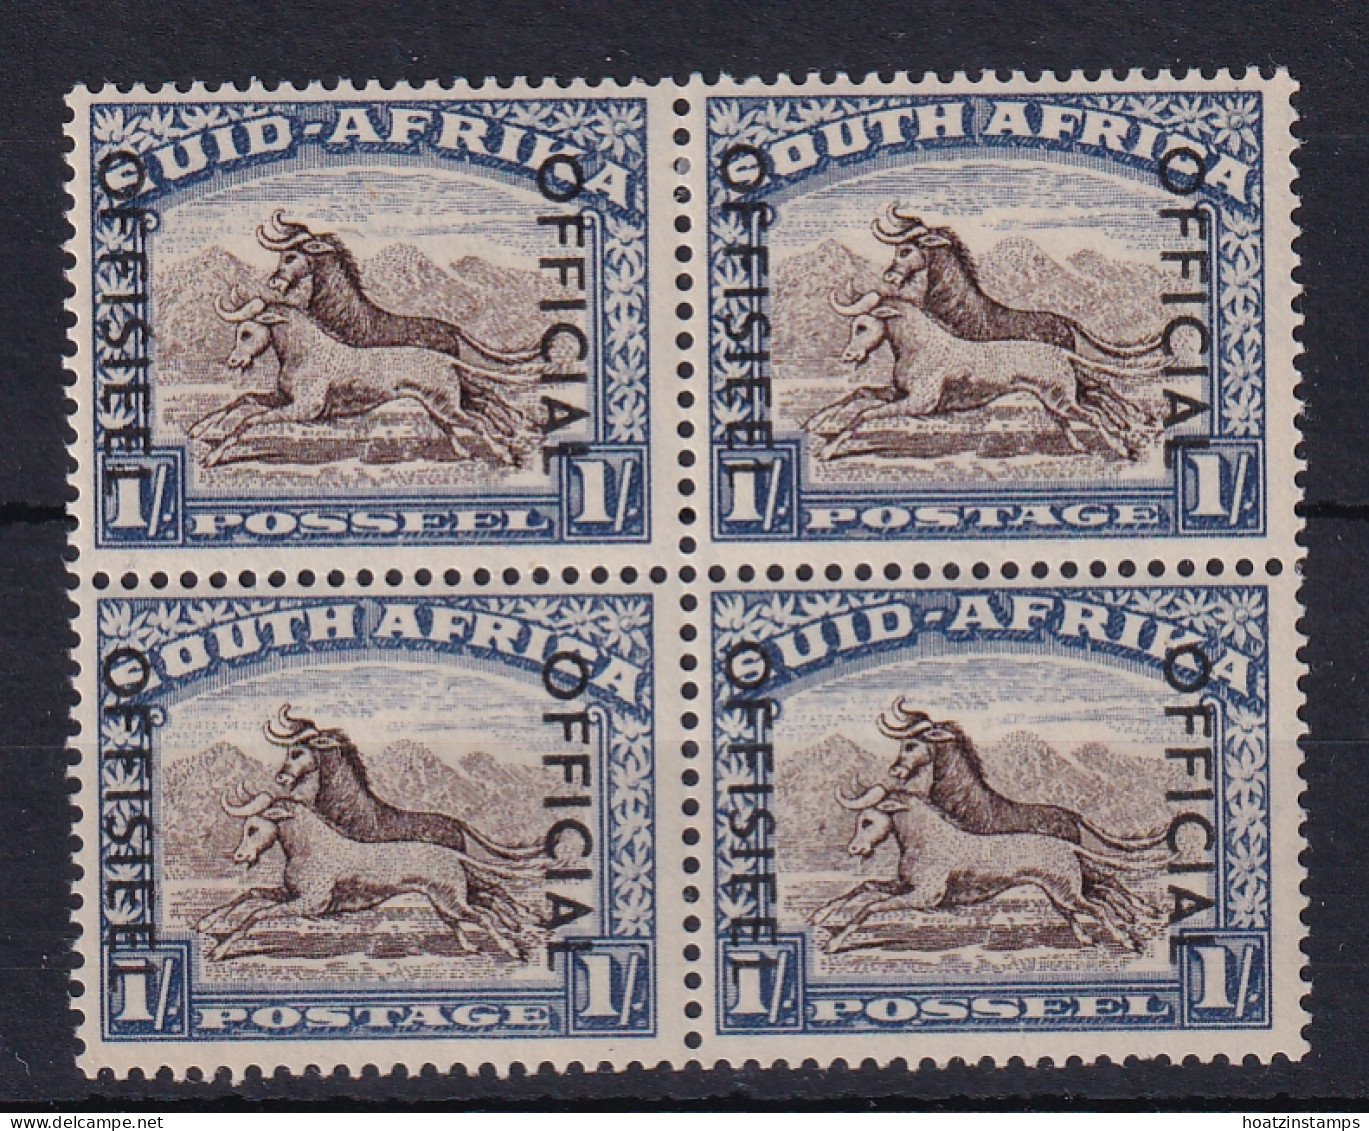 South Africa: 1950/54   Official - Wildebeest   SG O47a    1/-    Blackish Brown & Ultramarine  MNH Block Of 4 - Servizio